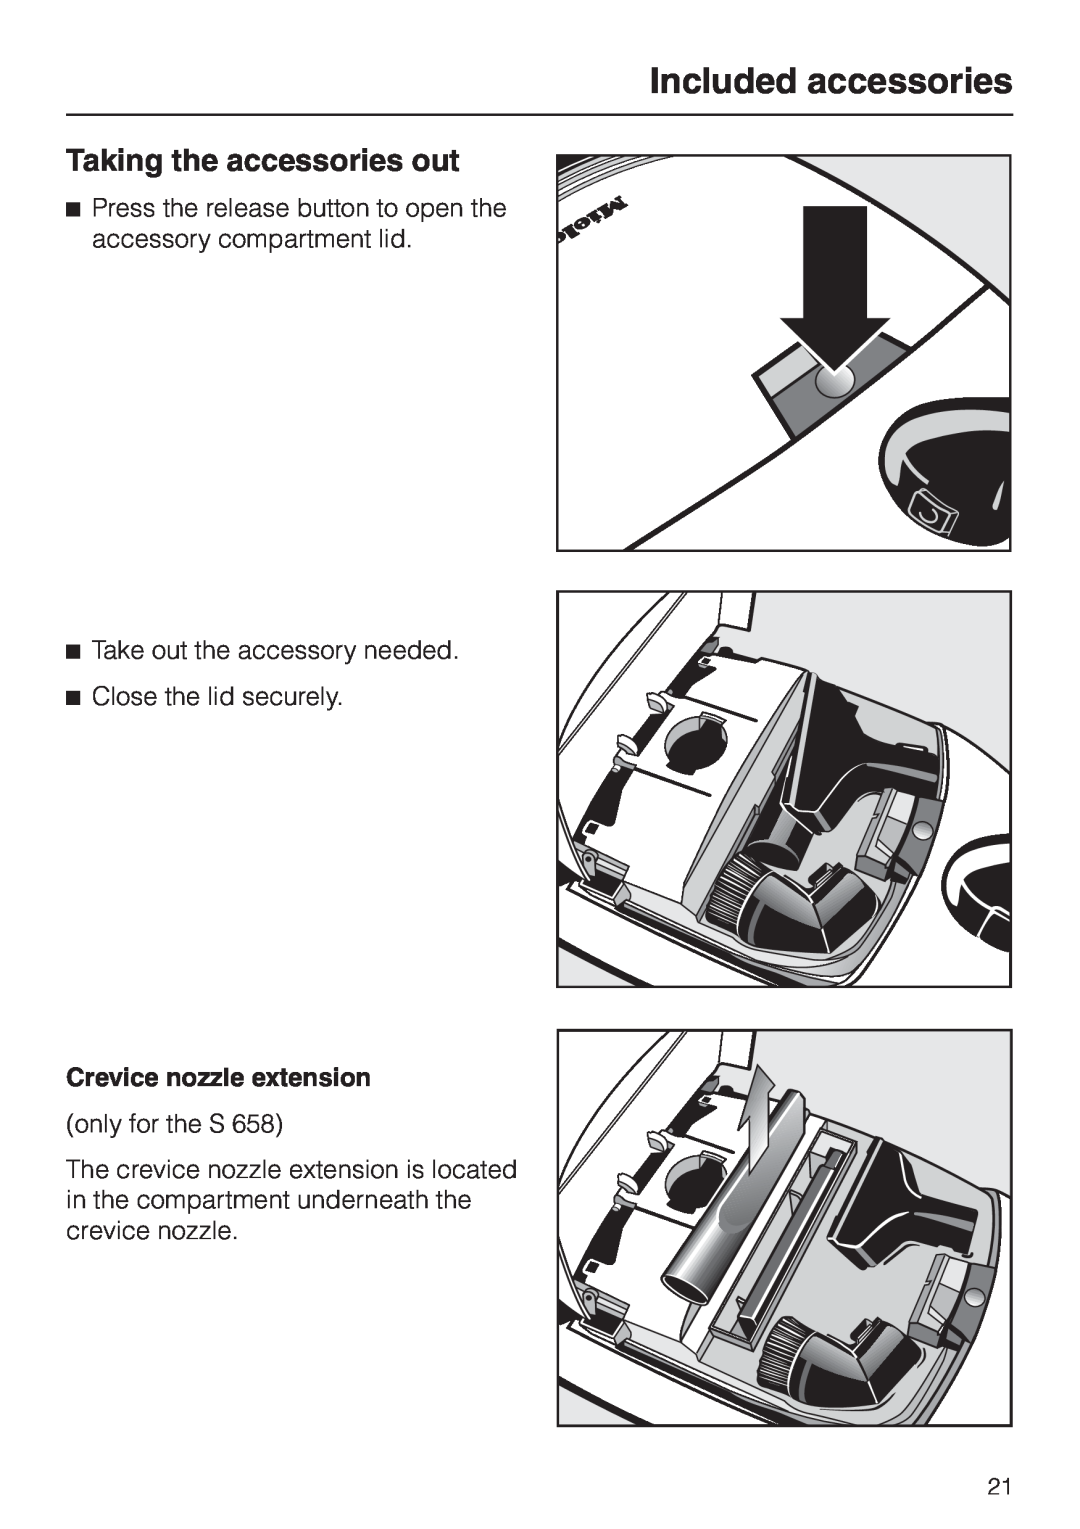 Miele S 658 manual Taking the accessories out, Included accessories, Crevice nozzle extension 